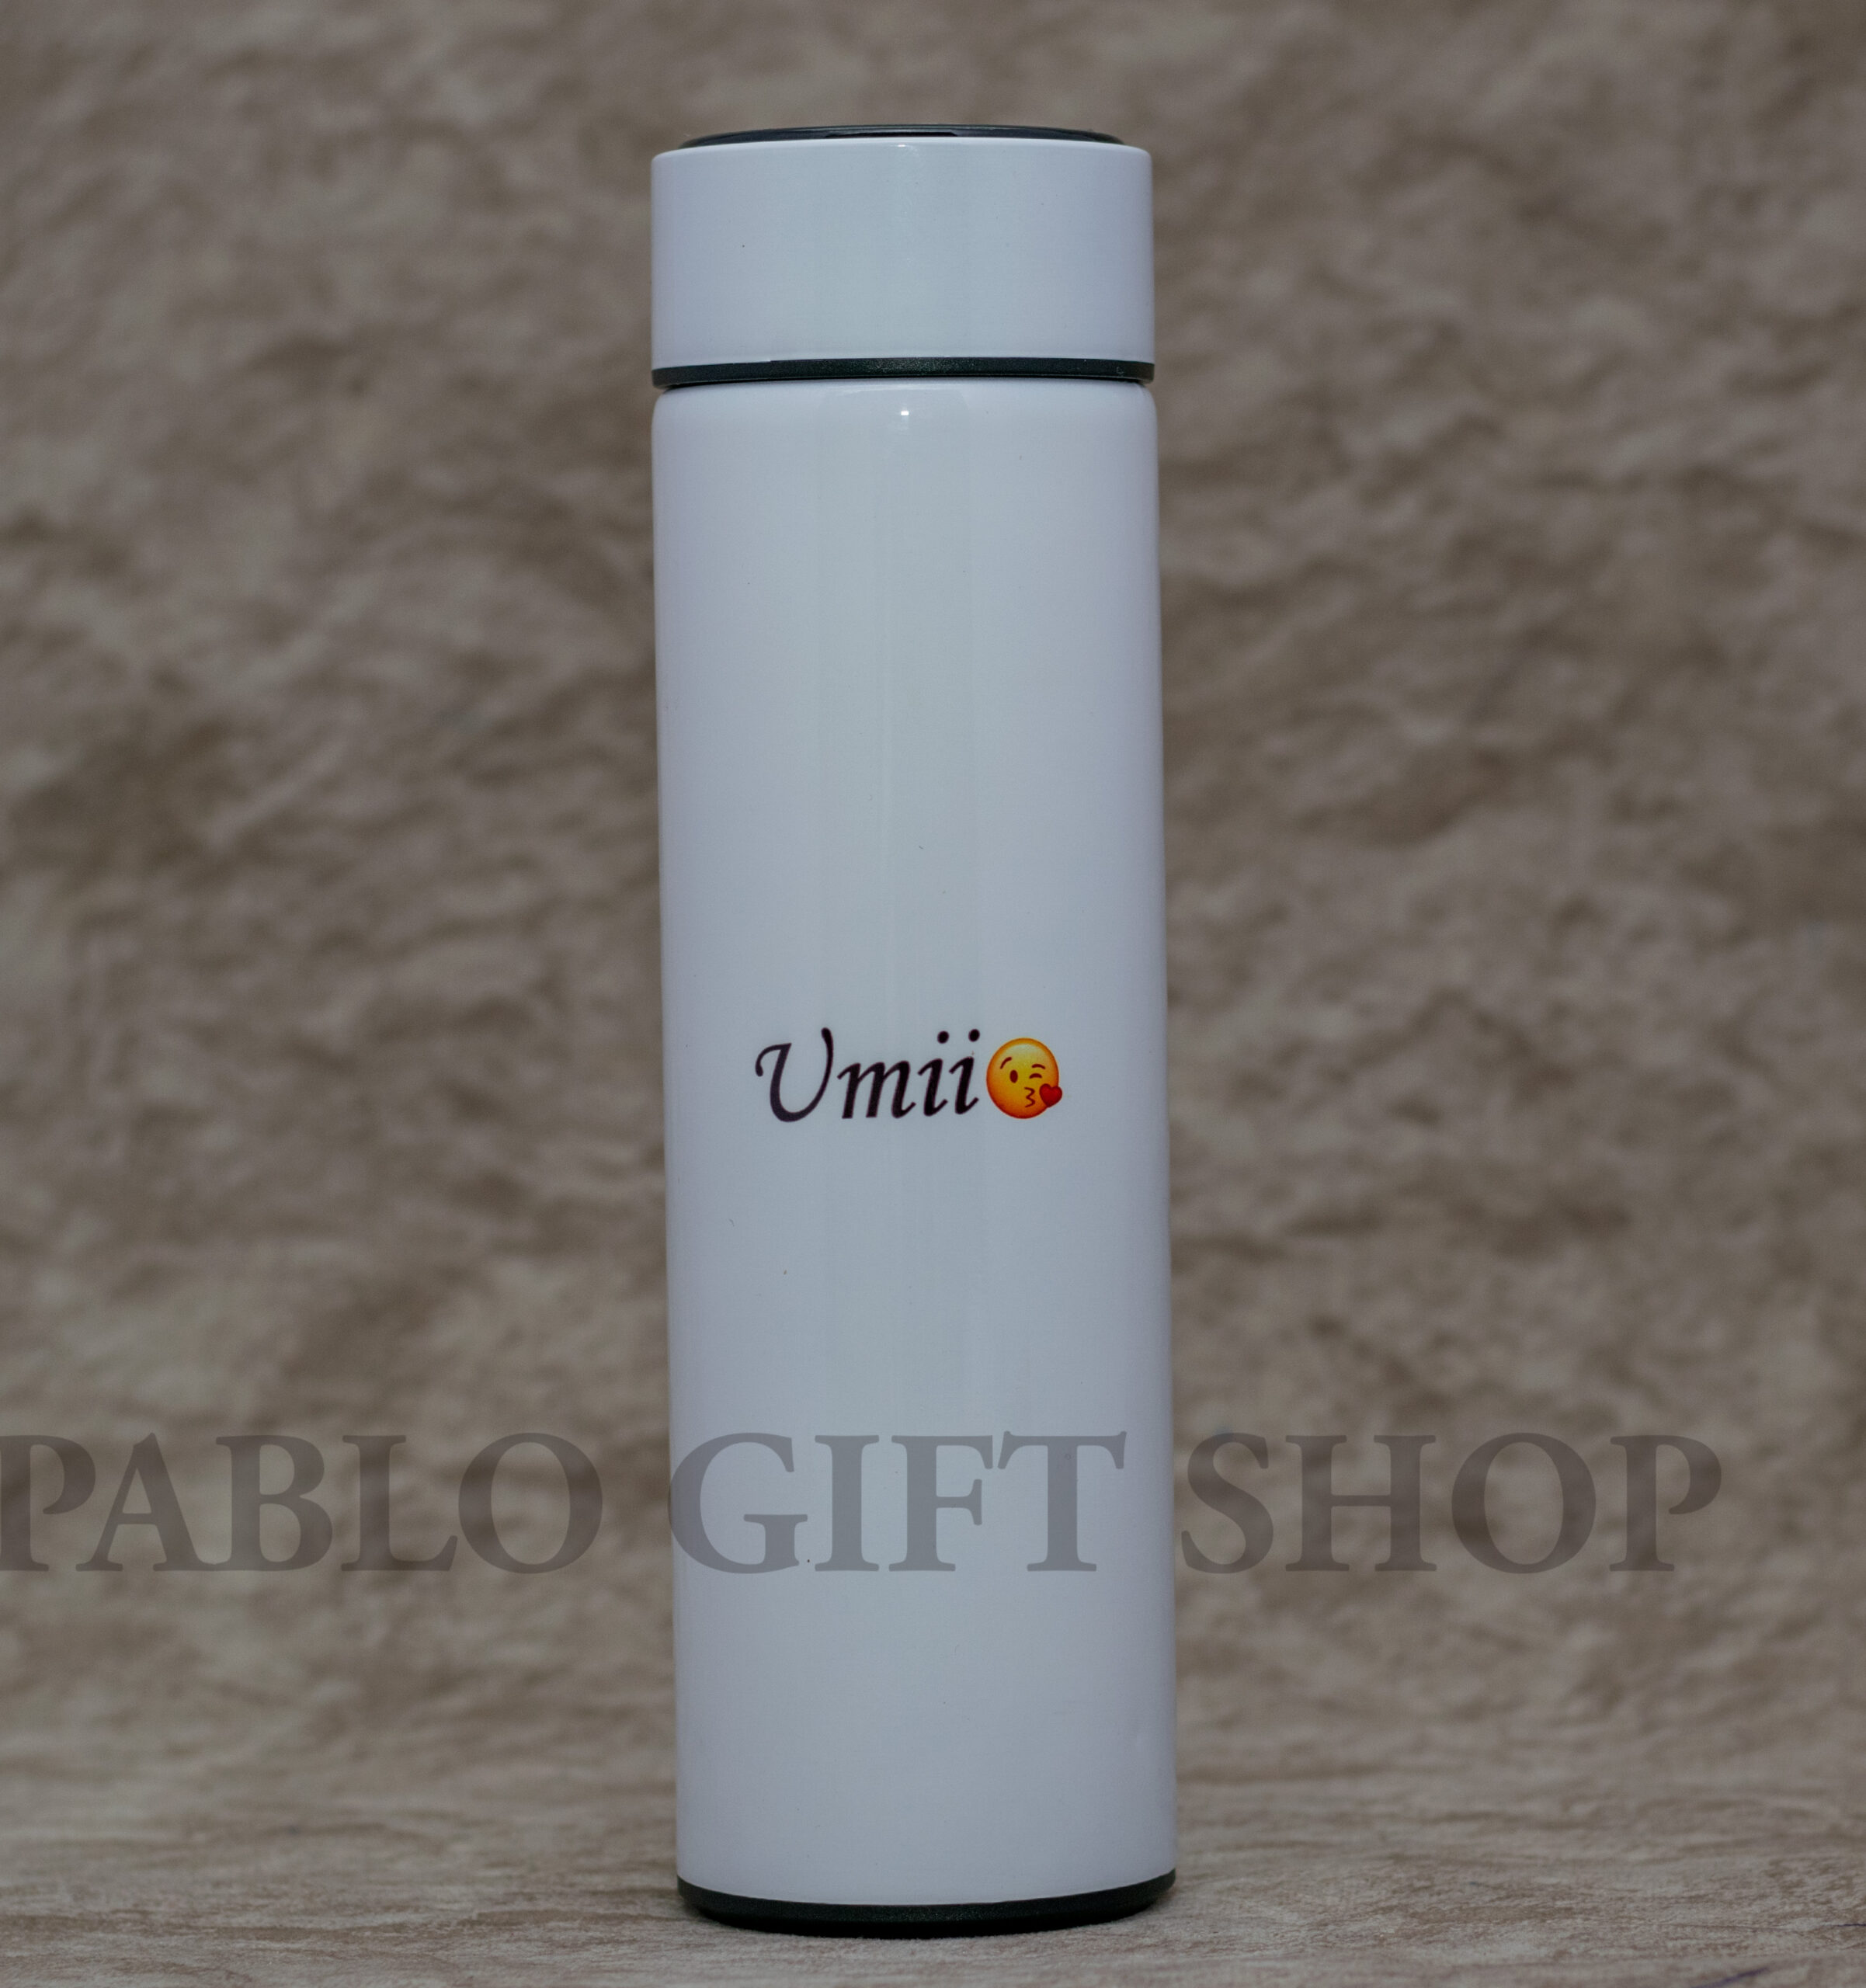 https://www.pablogiftshop.com/wp-content/uploads/2022/10/customized-white-thermo-flask.jpg